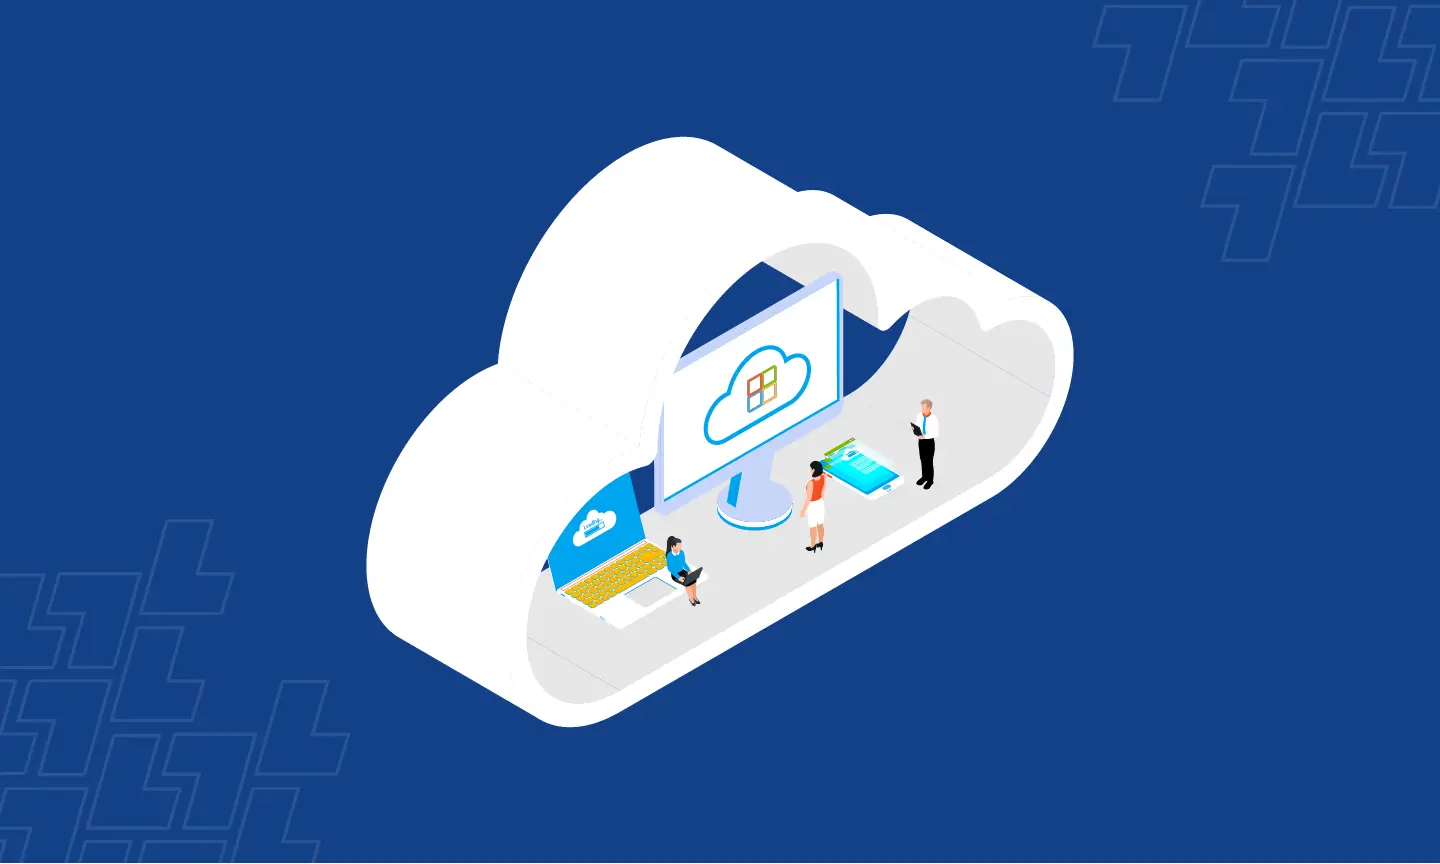 Why should businesses choose Microsoft Azure?